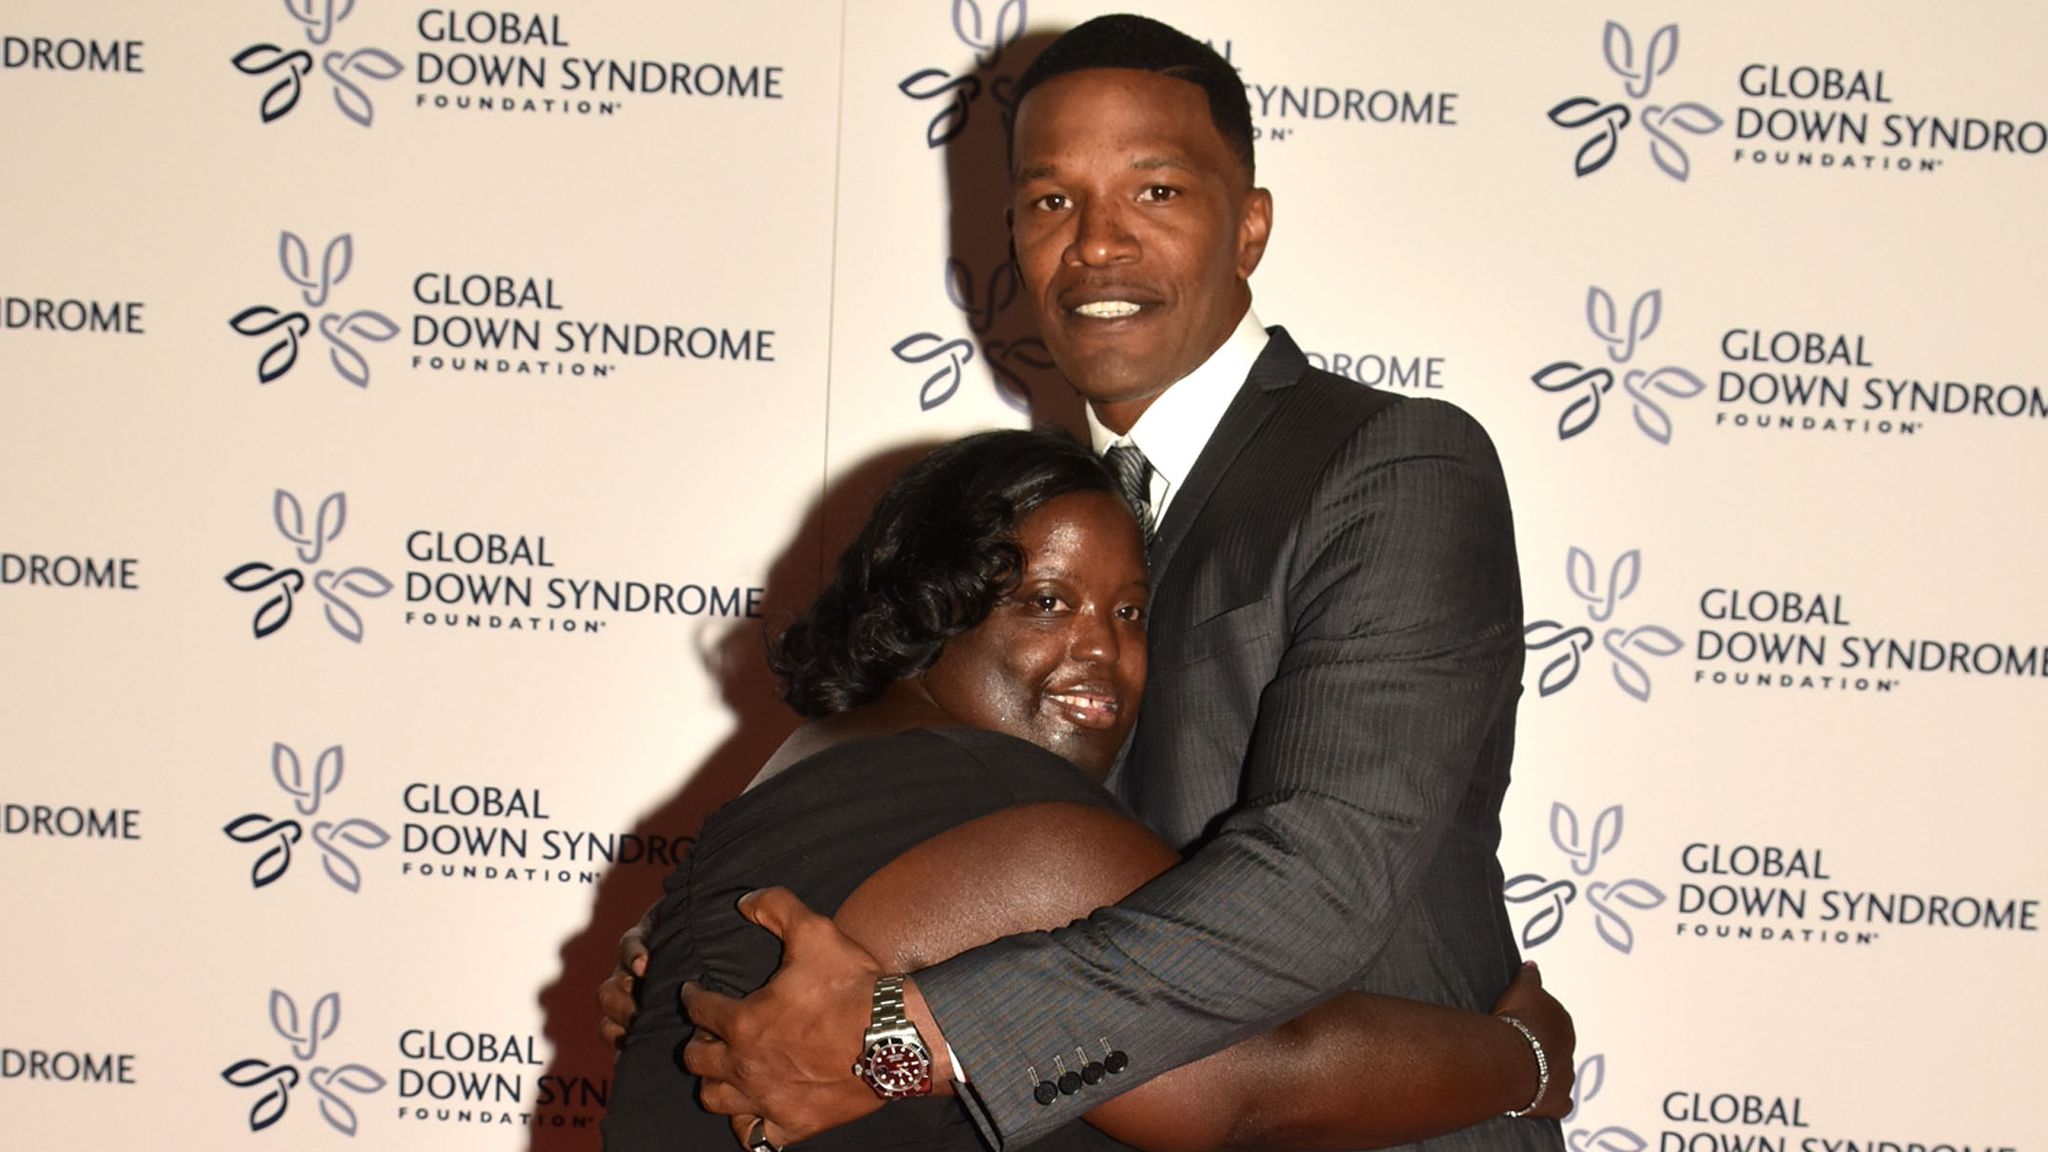 Prayers:  Jamie Foxx Sister Has Passed At The Age of 36